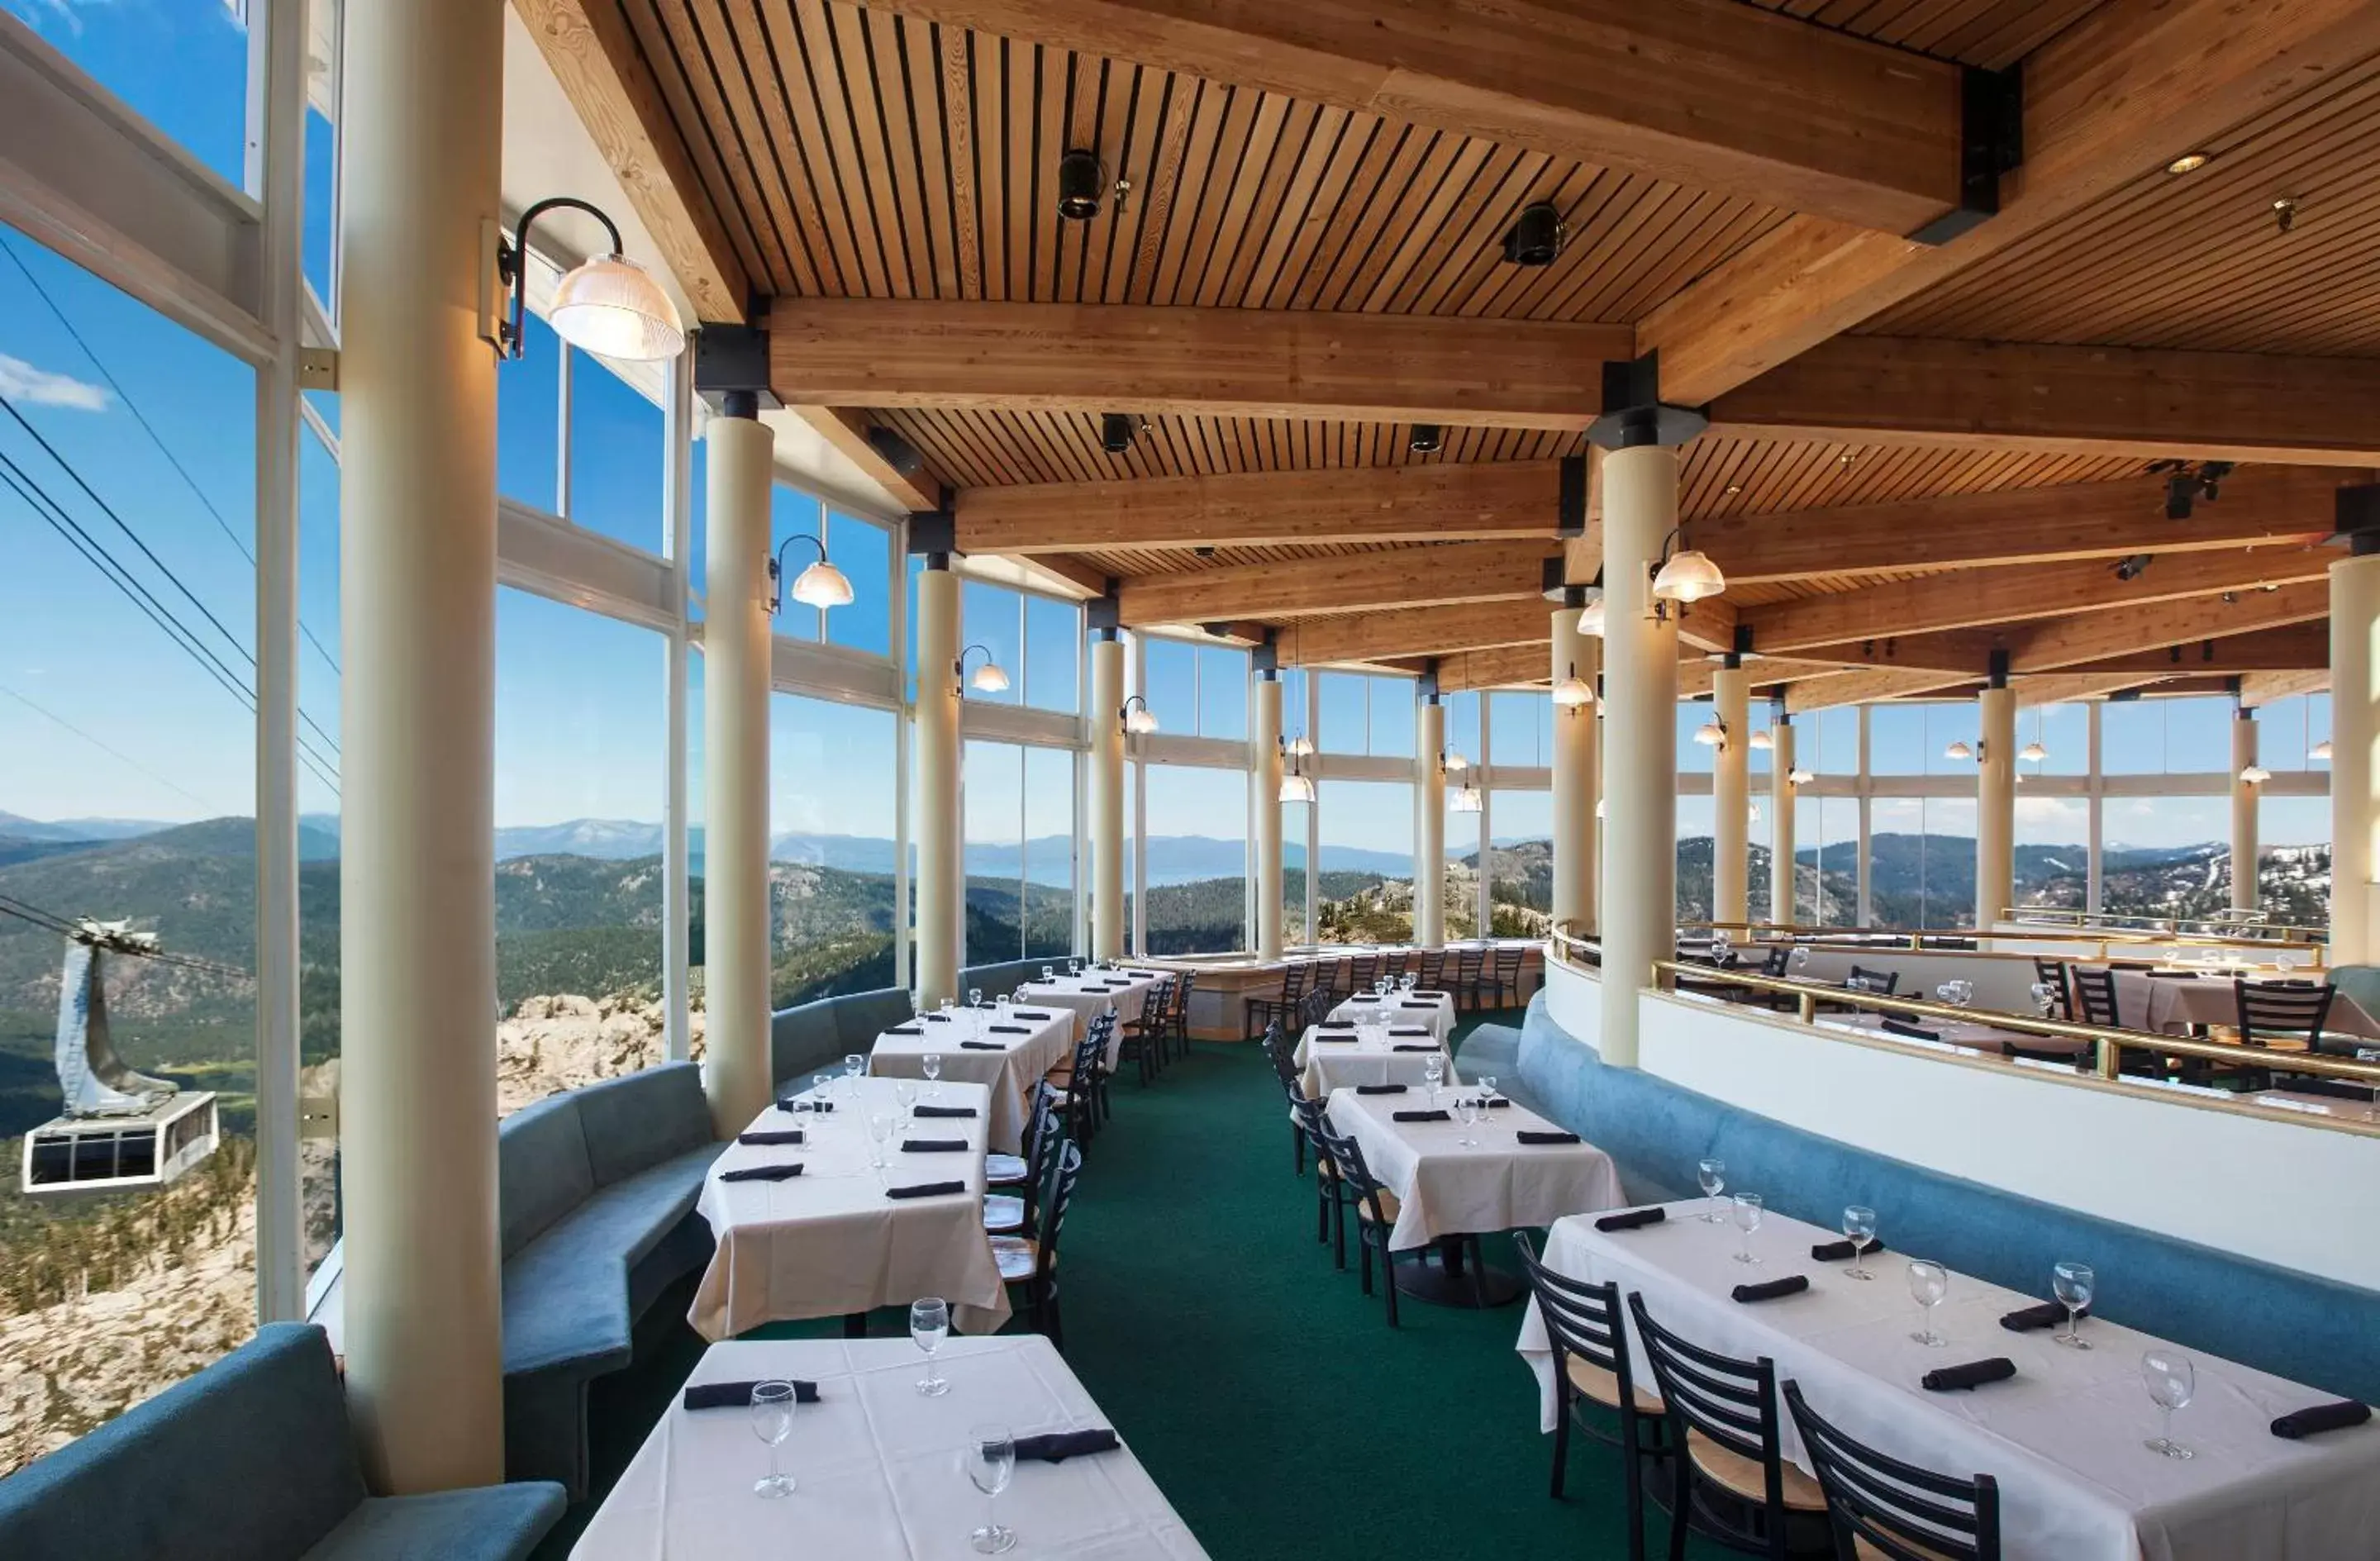 Banquet/Function facilities, View in The Village at Palisades Tahoe